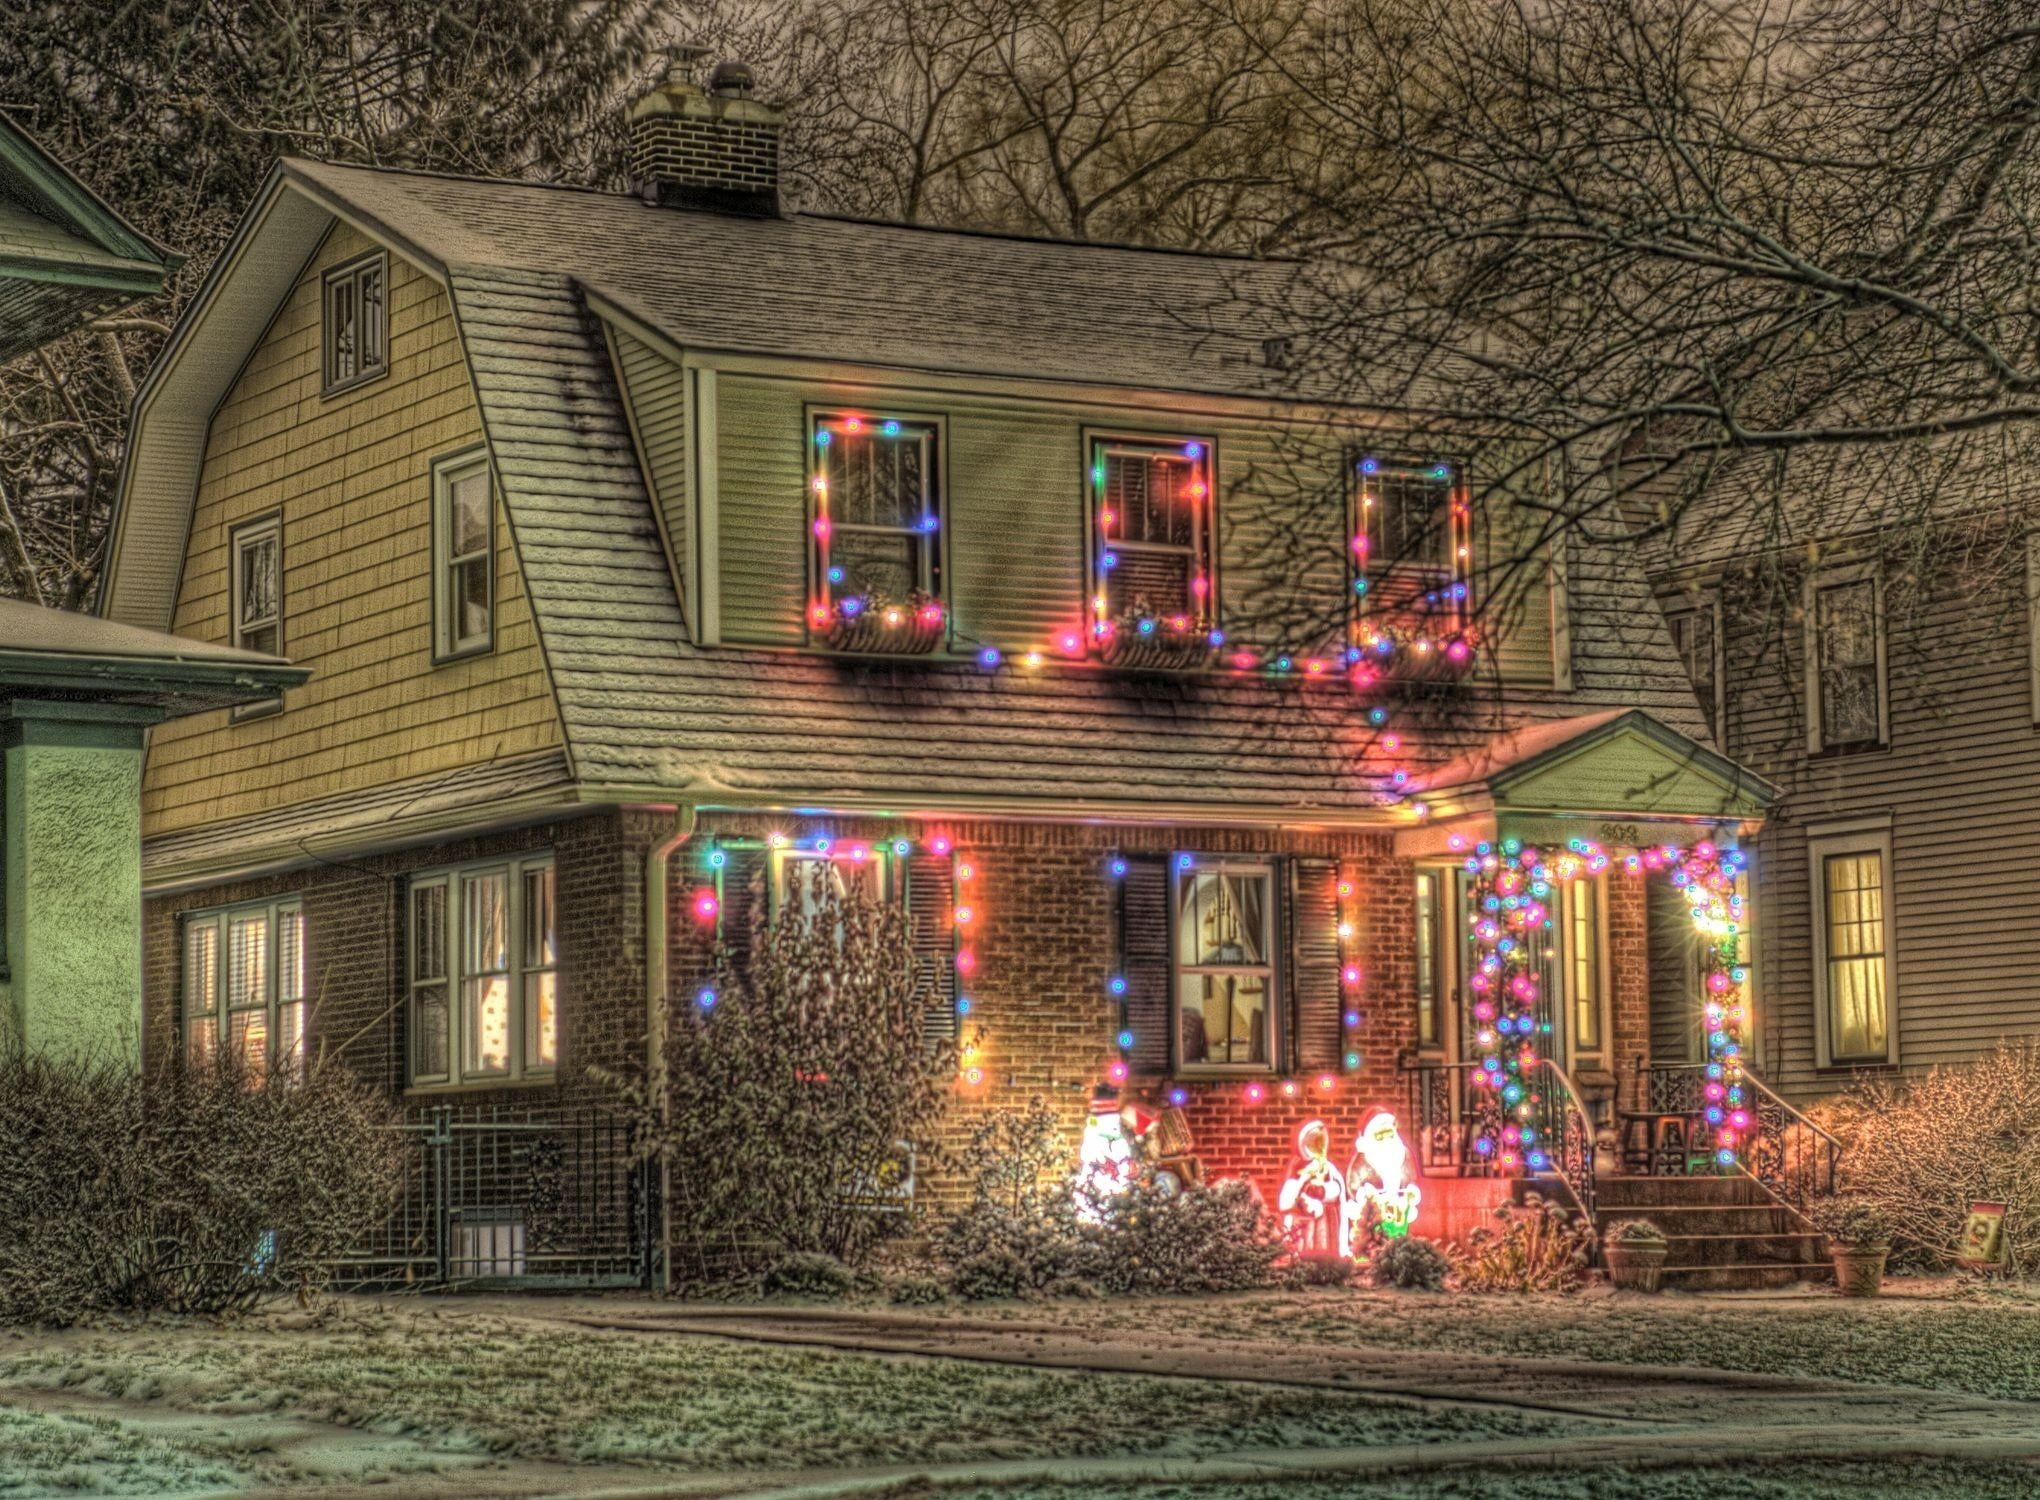 3840x2160 resolution | house with Christmas decor during nighttime HD ...